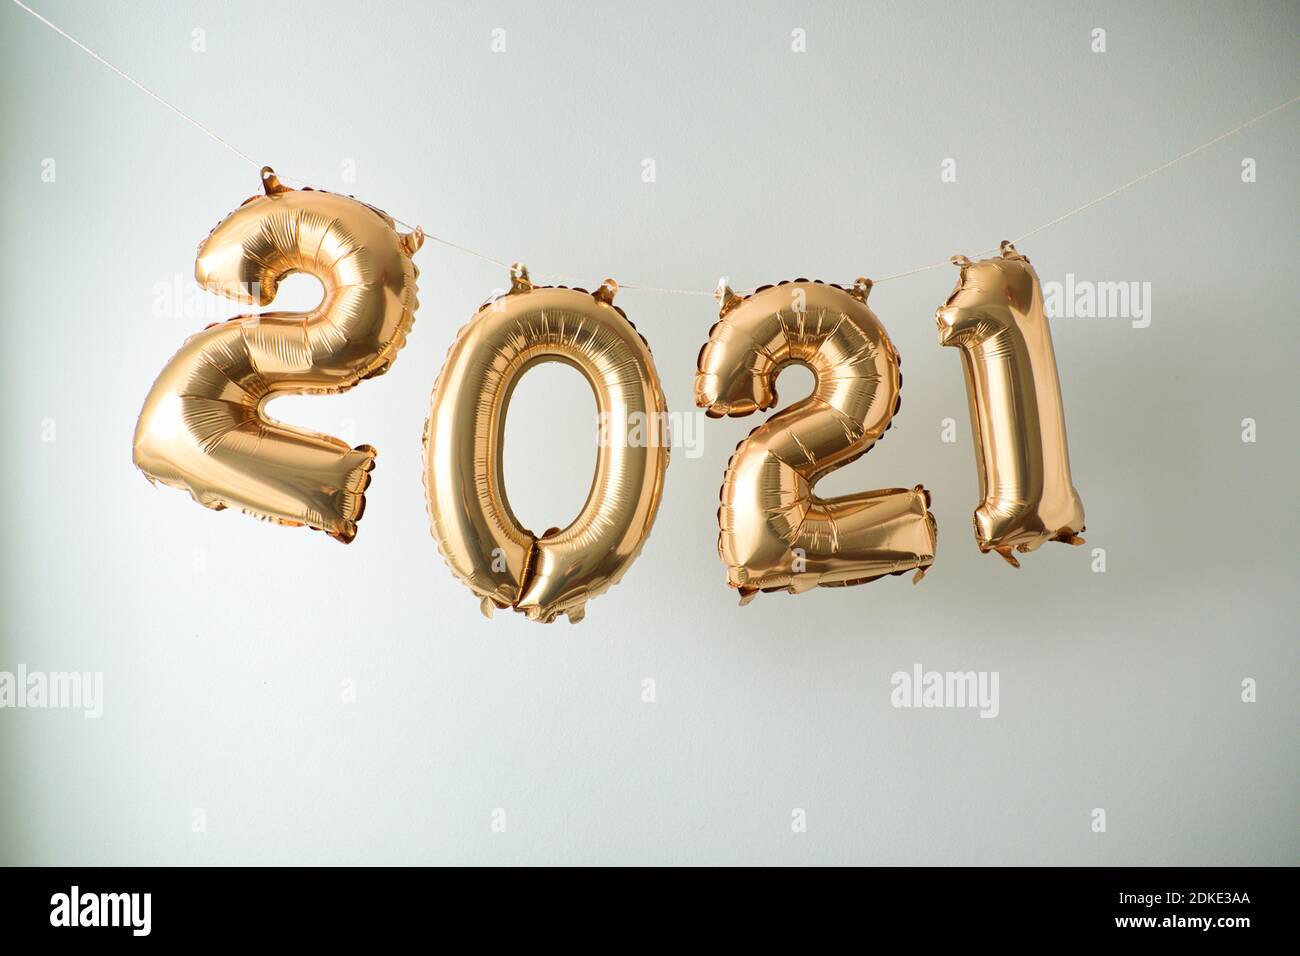 Inflated New Year's balloon numbers hanging in front of white wall background. Stock Photo